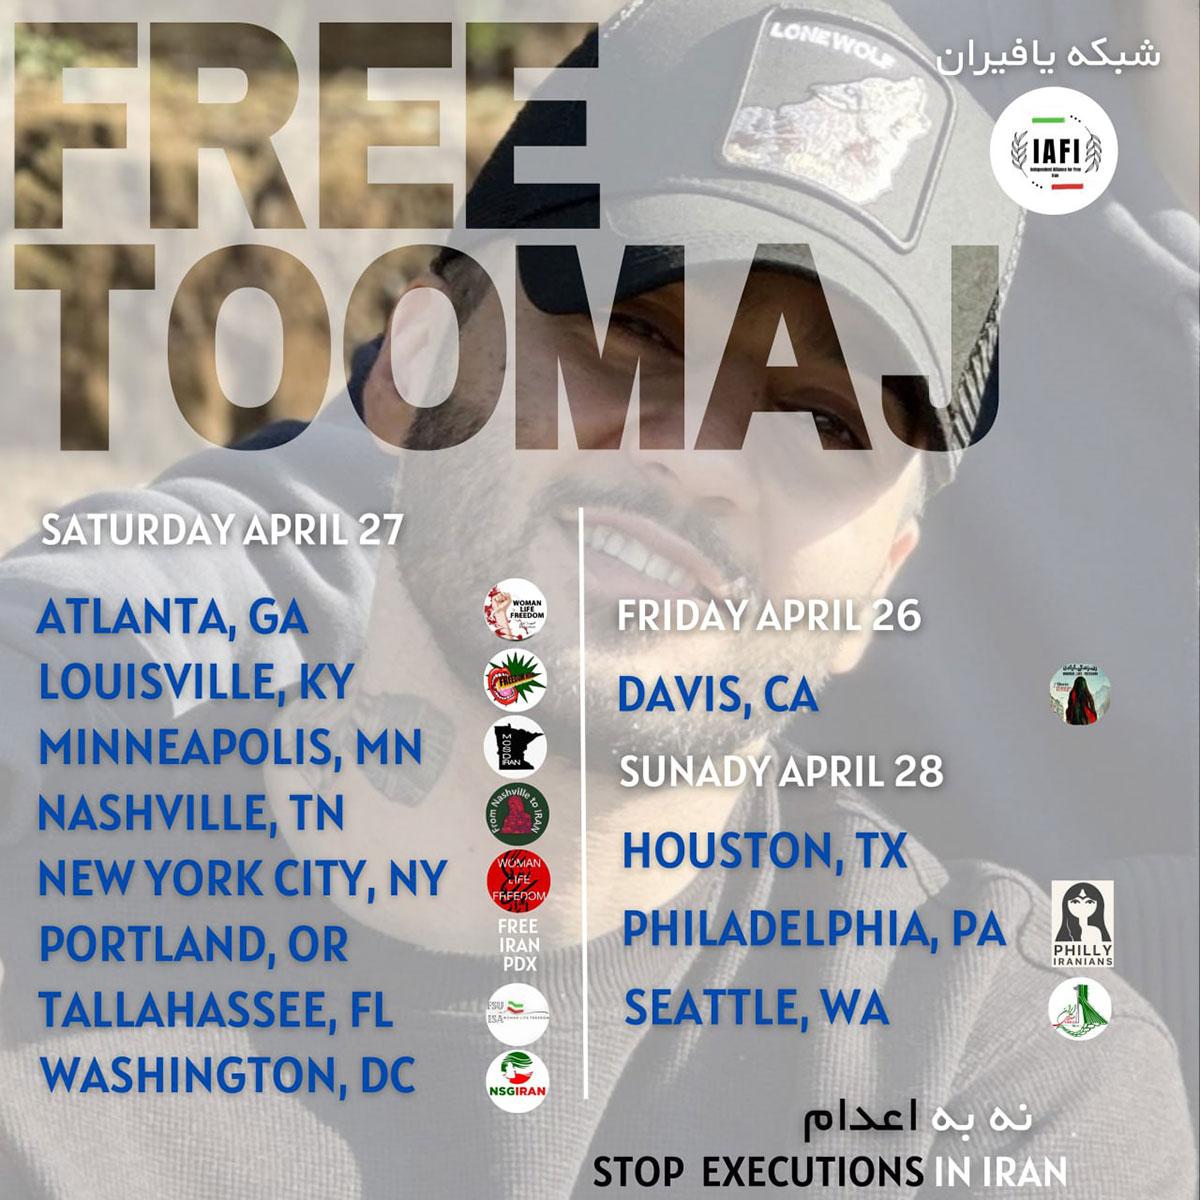 Free Toomaj protests in several cities